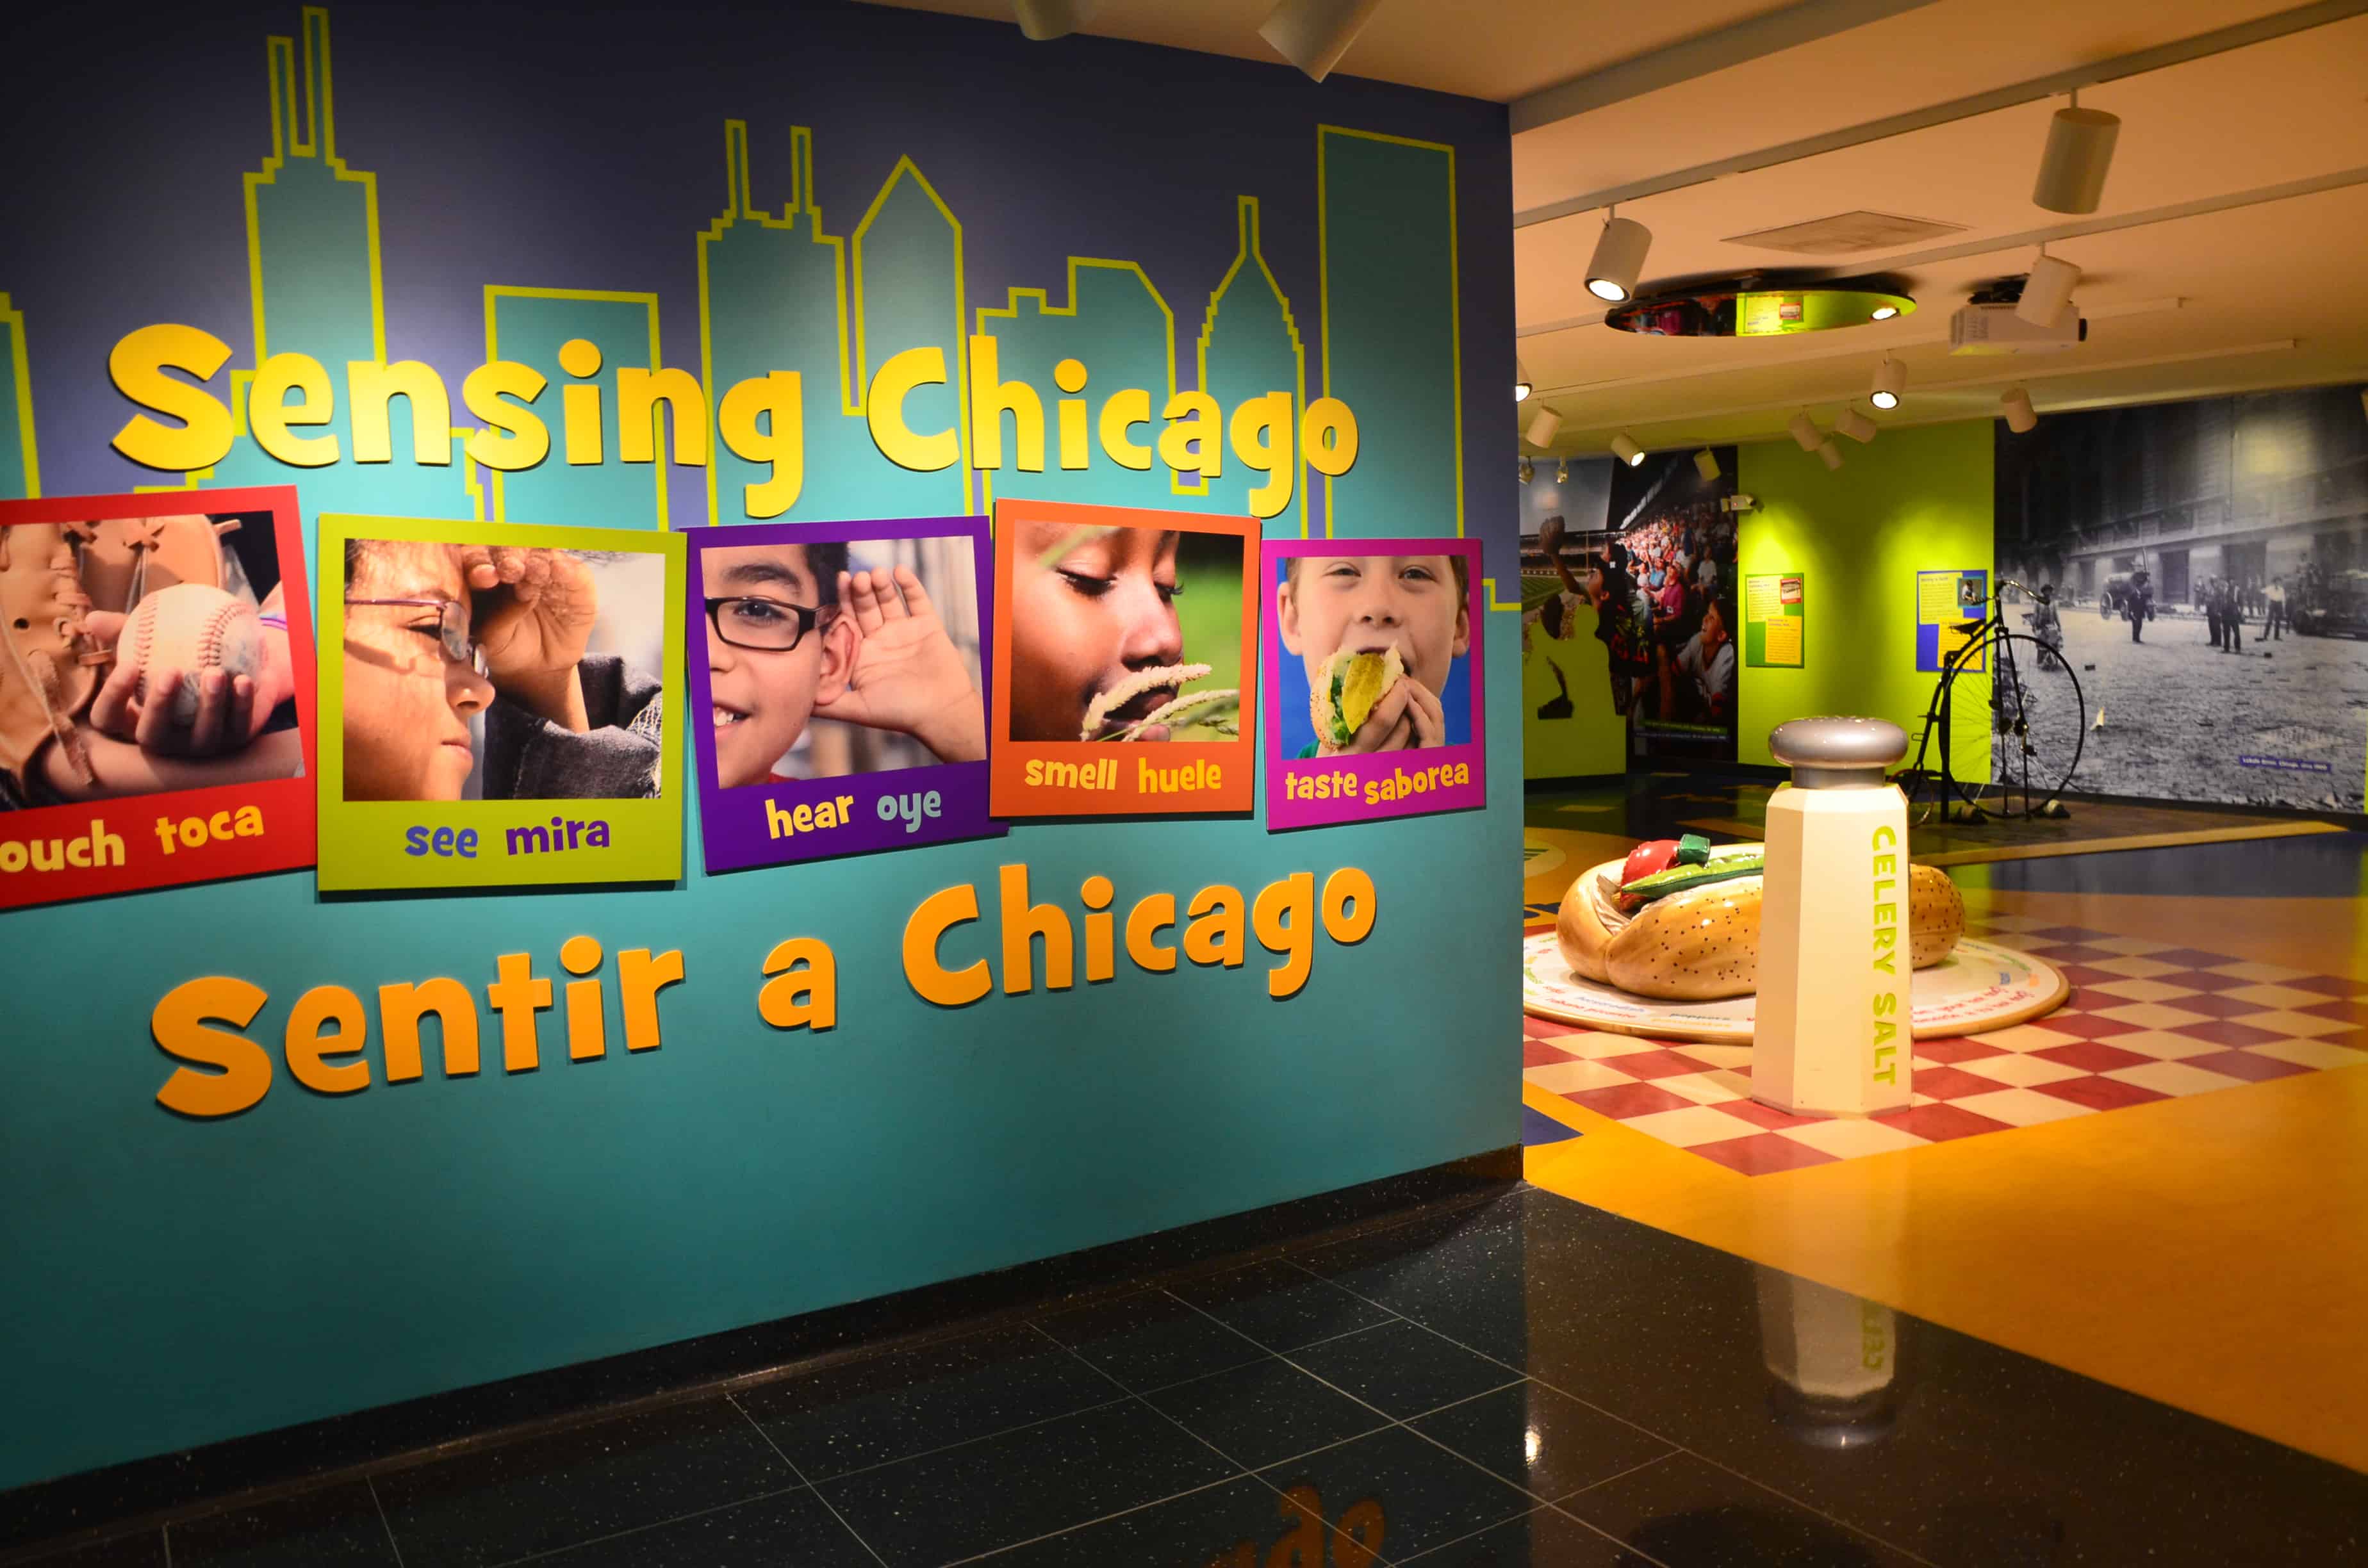 Sensing Chicago Exhibit at the Chicago History Museum